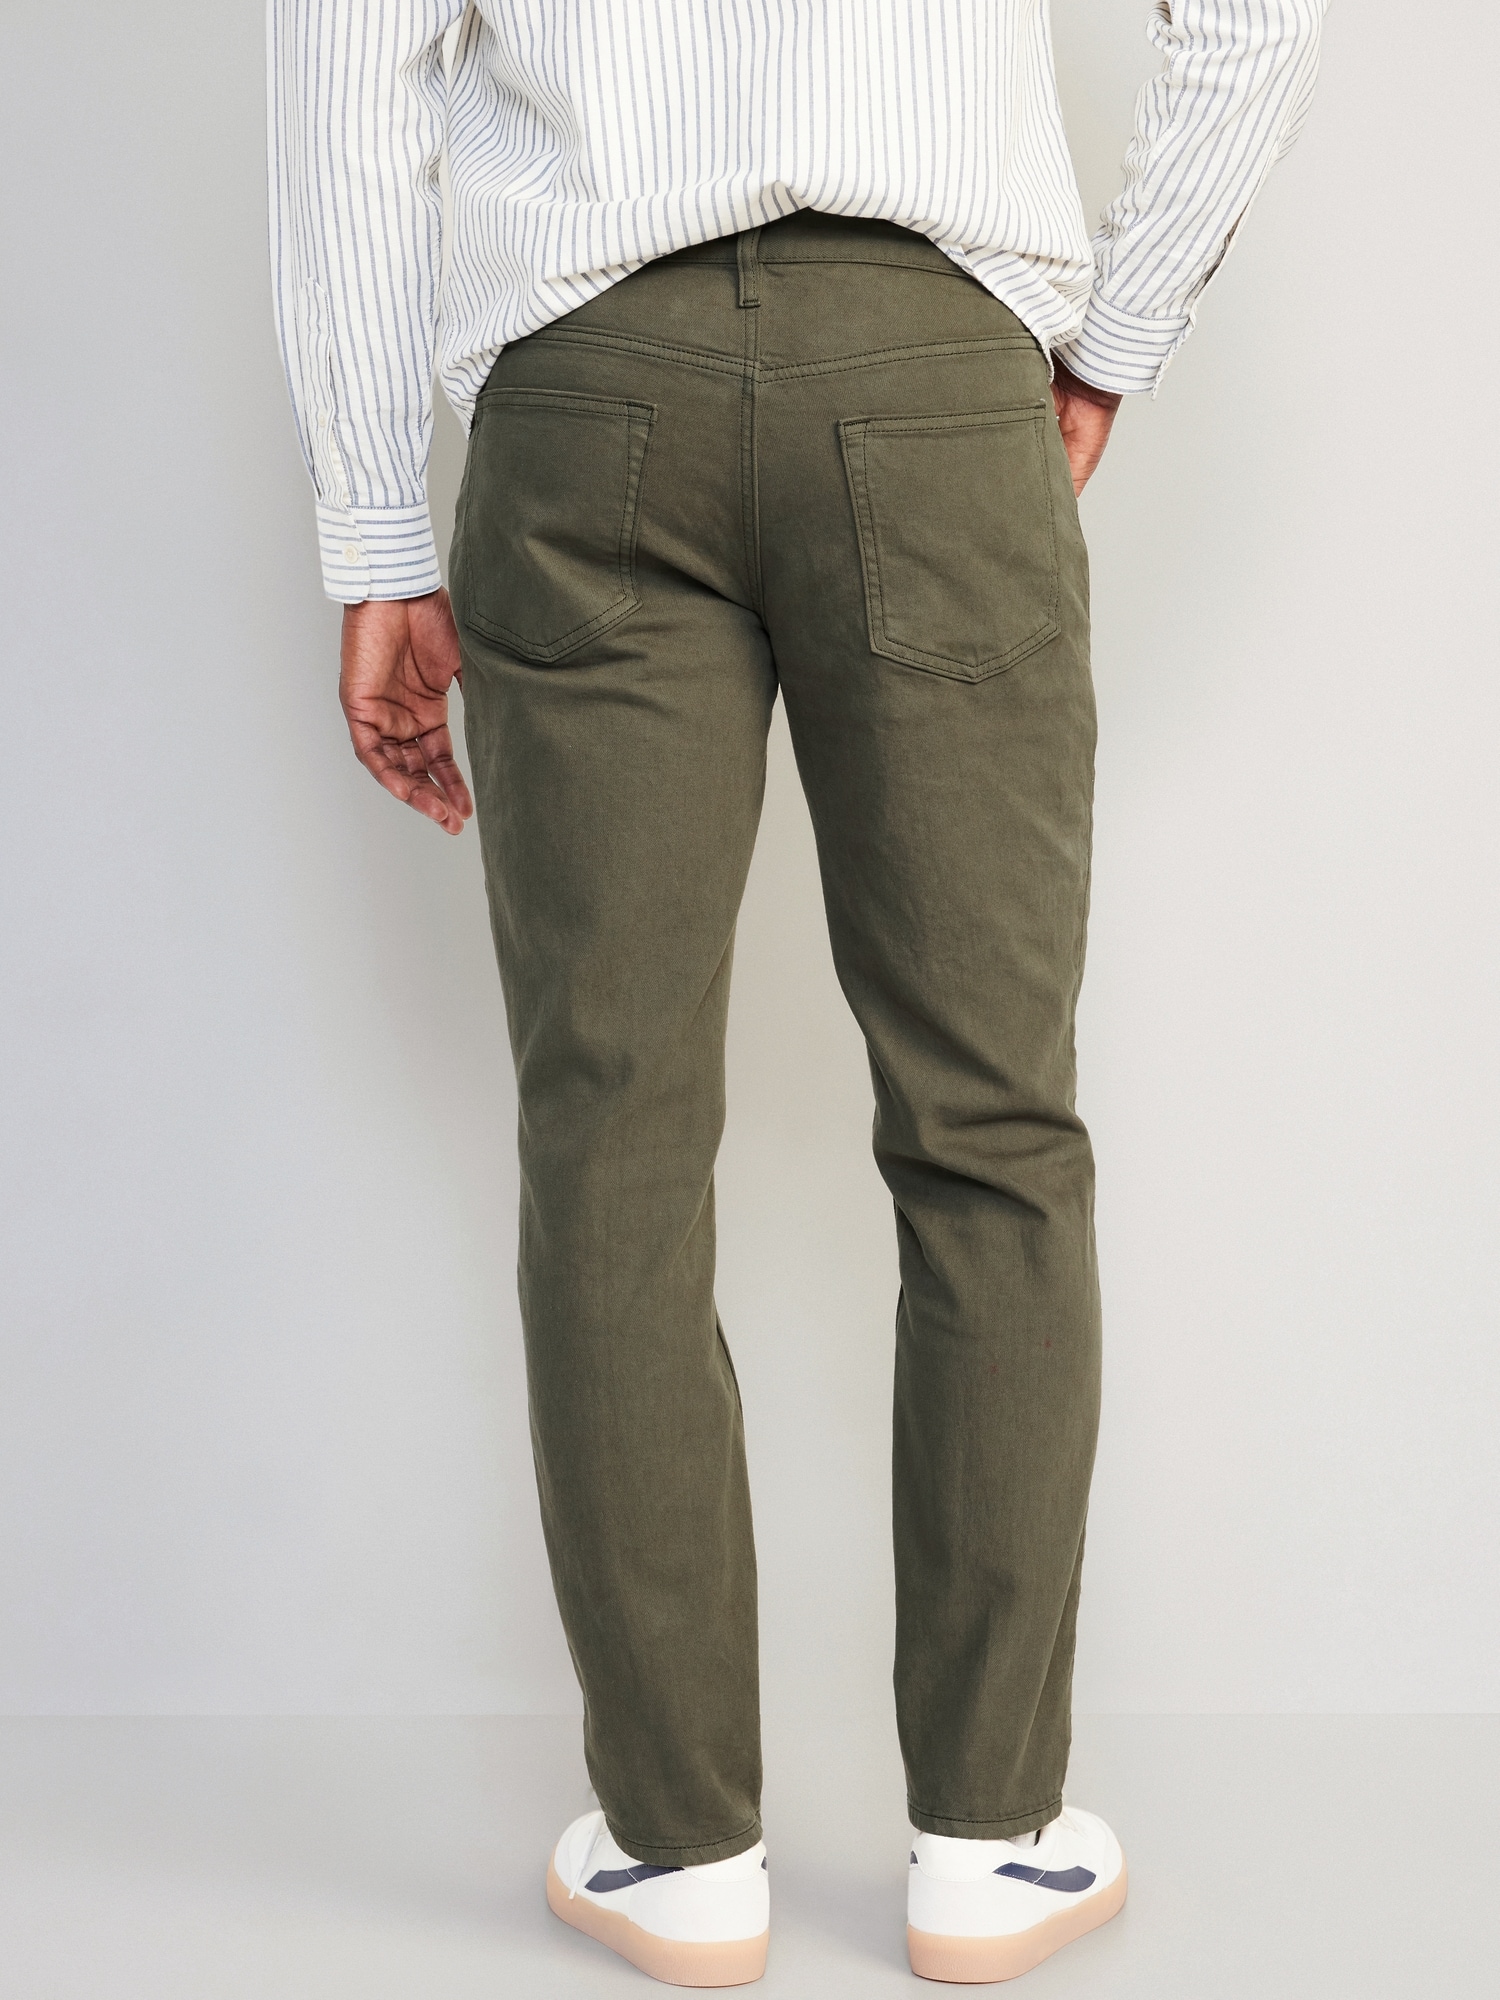 Buy LIFE Mens 8 Pocket Solid Cargo Pants | Shoppers Stop